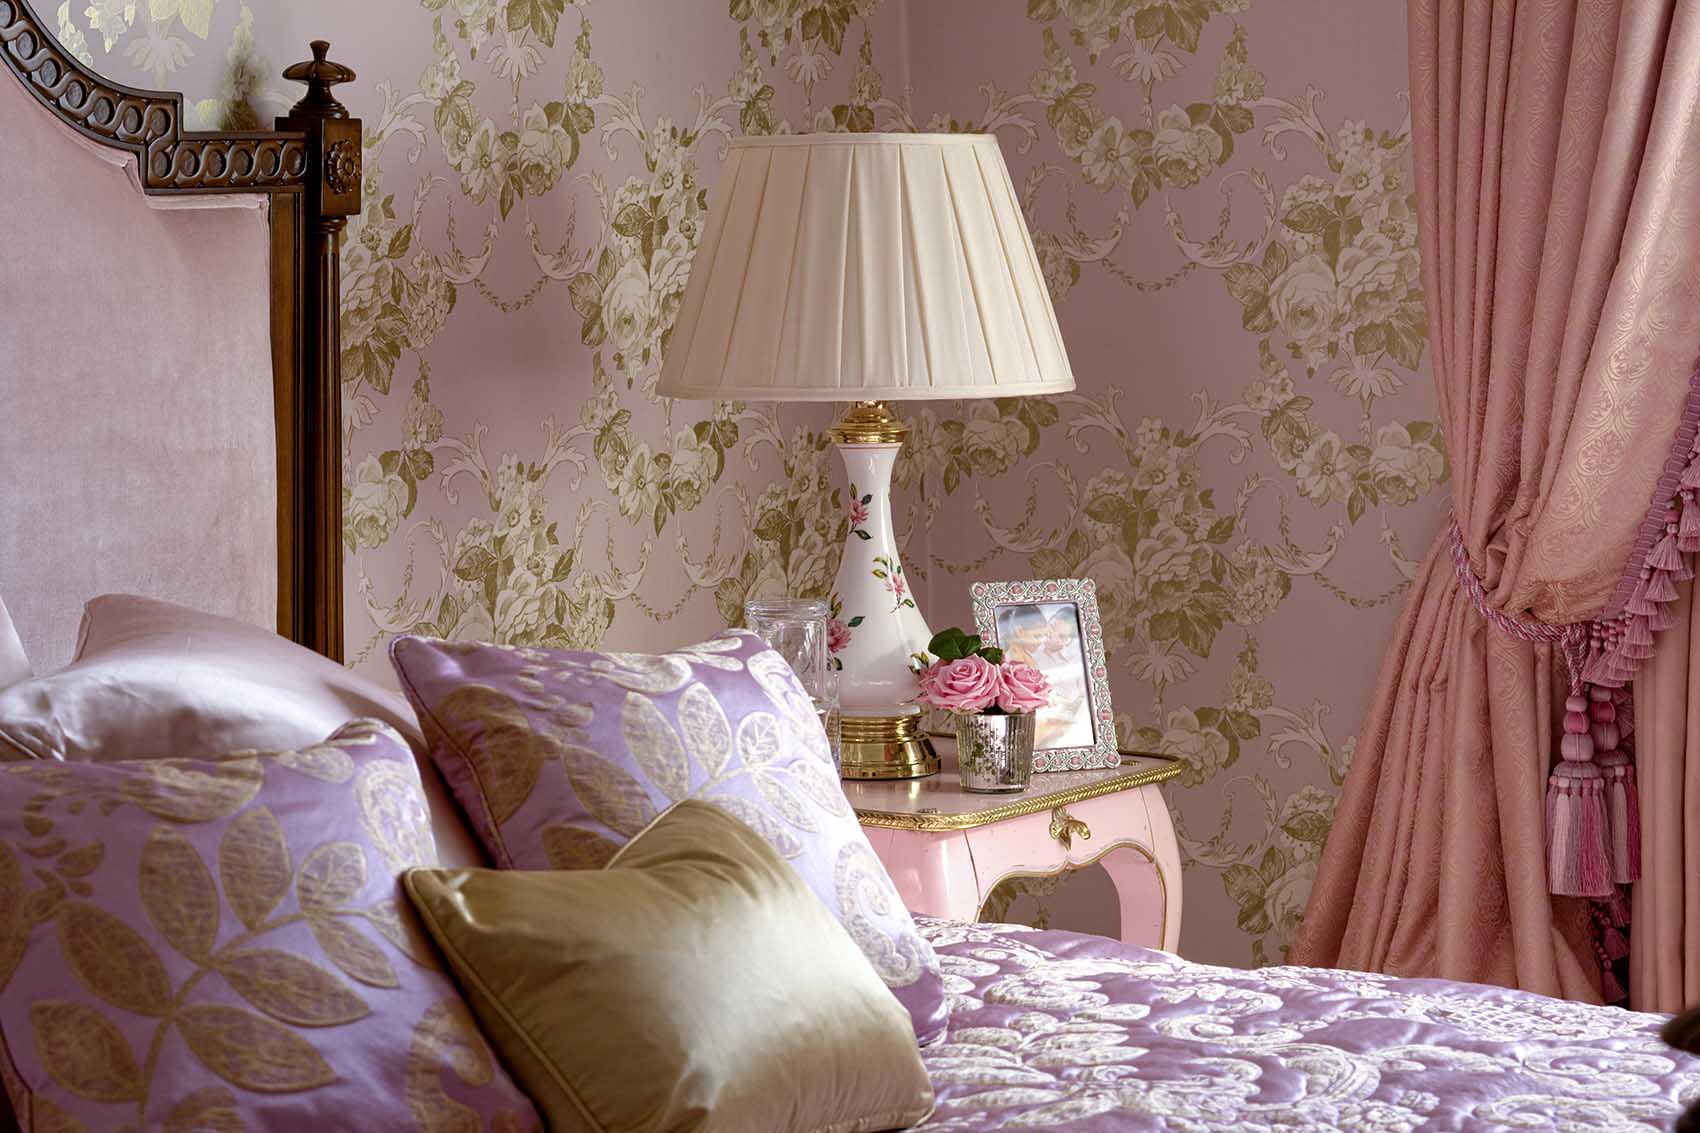 Girls bedroom, pink and gold floral wall paper, pink silk upholstered headboard, gold accents